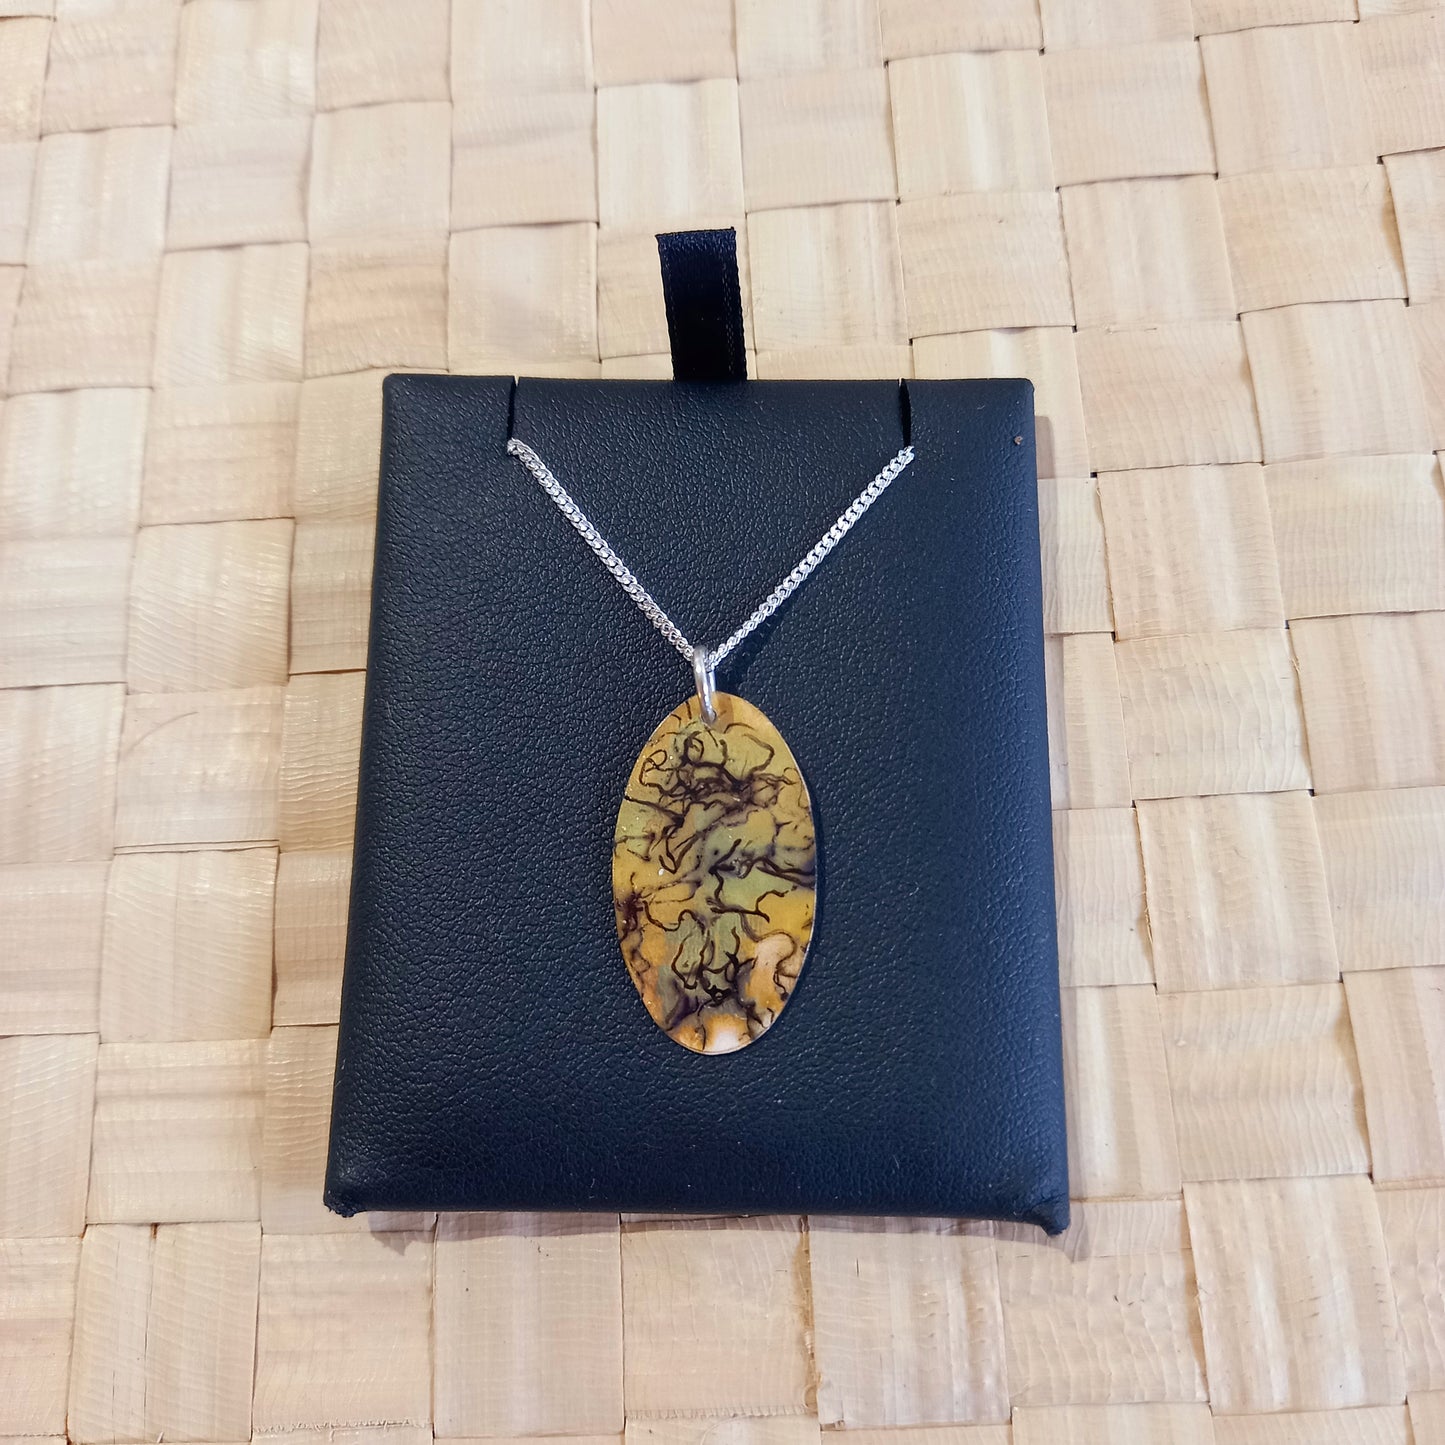 Distraction Gold Oval Pendant